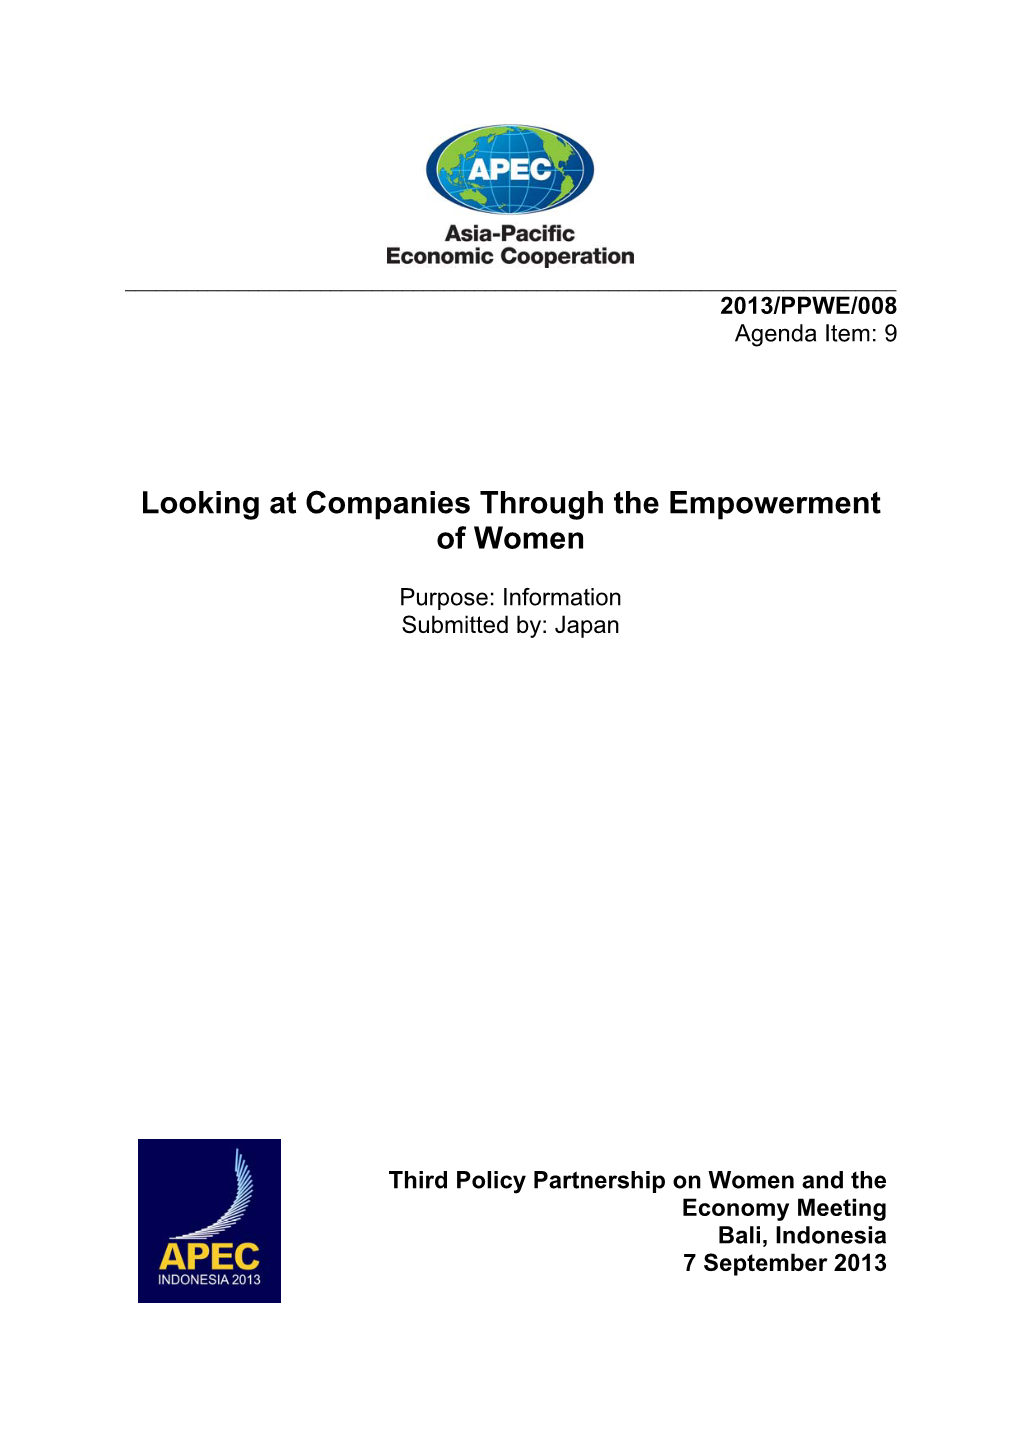 Looking at Companies Through the Empowerment of Women